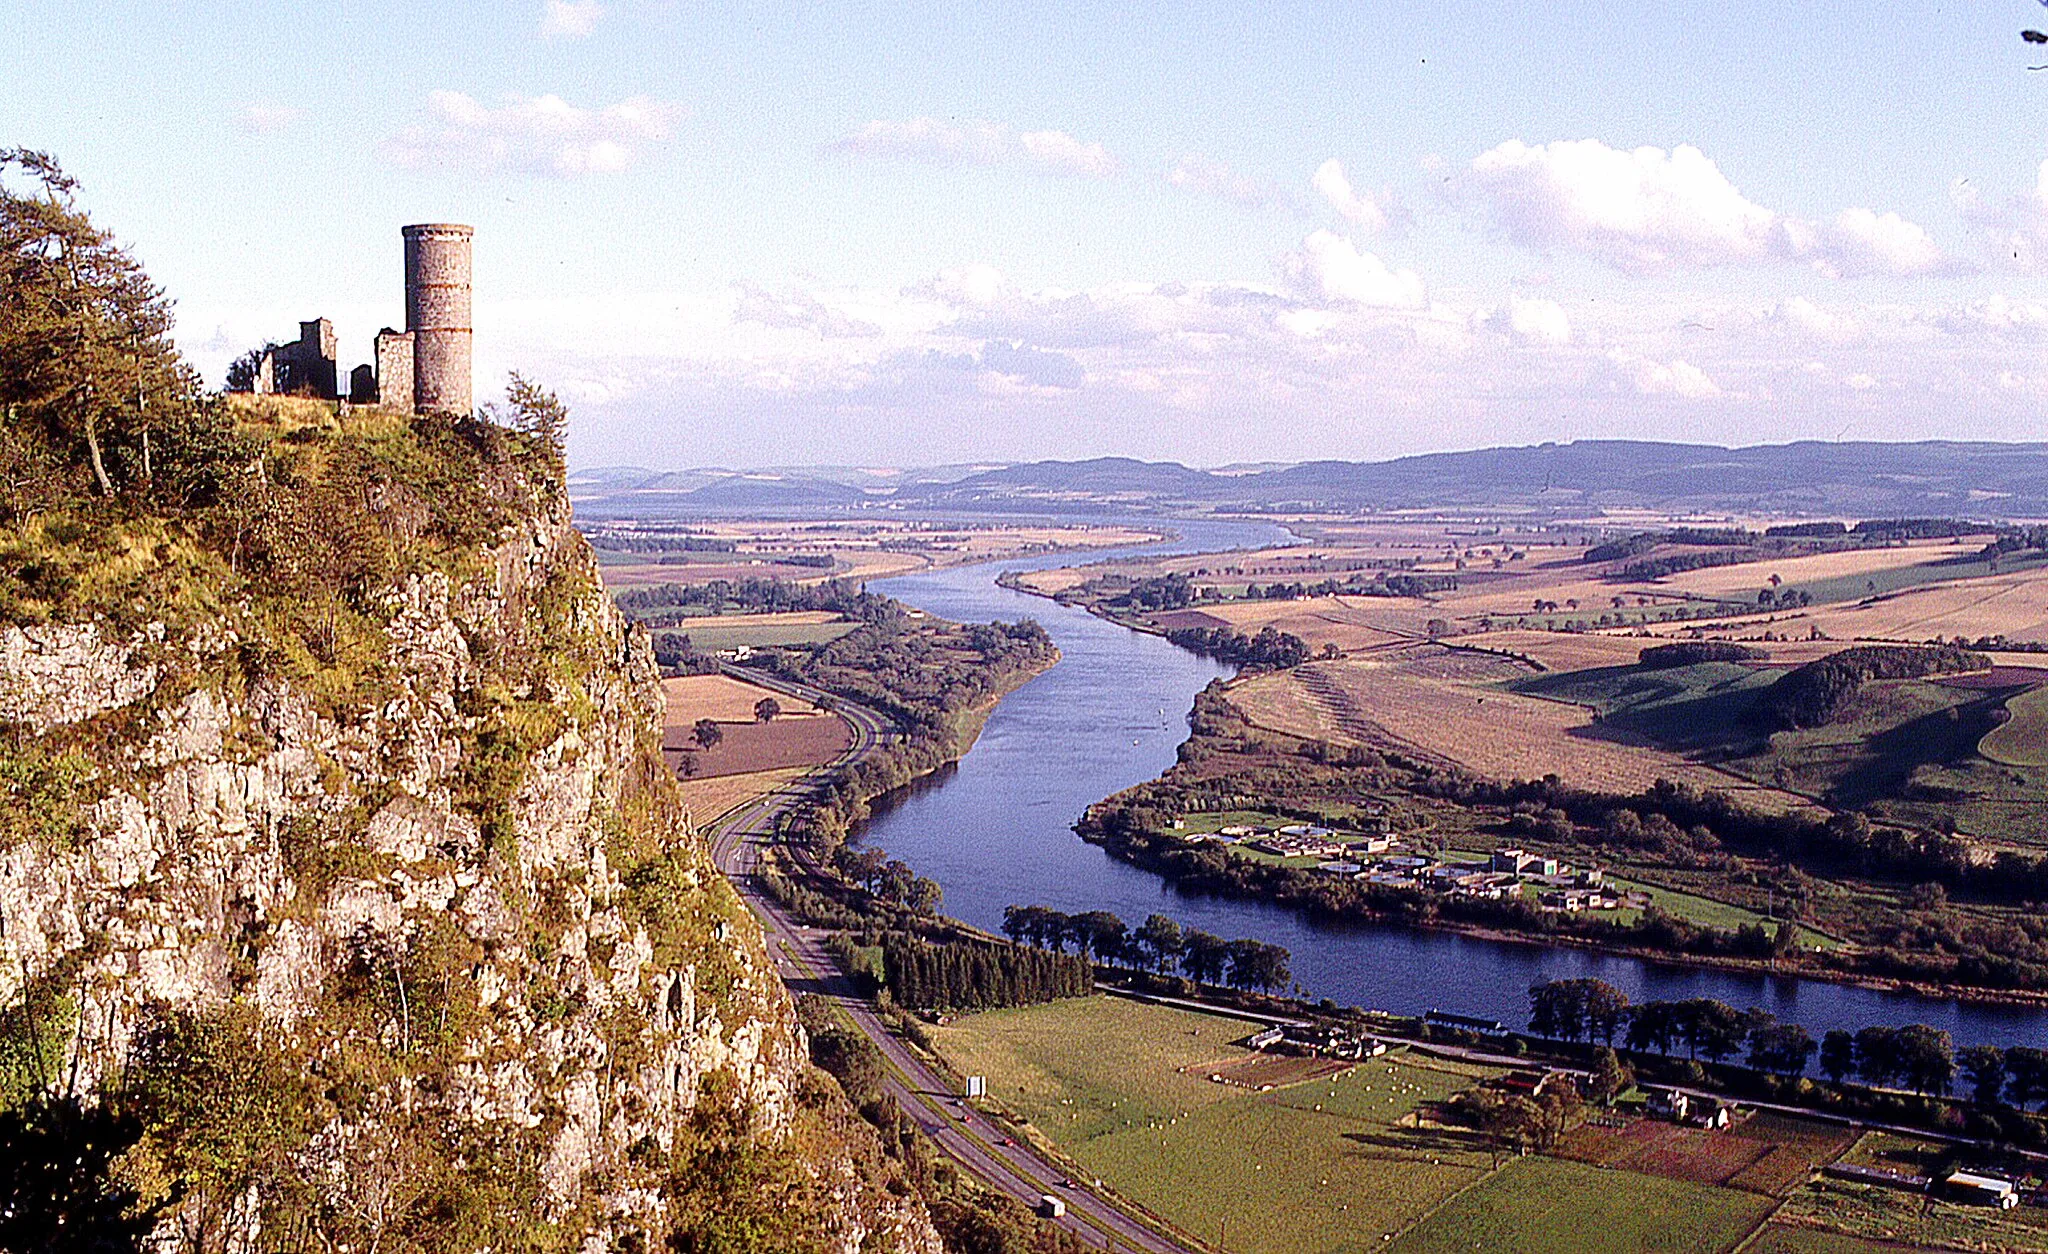 Photo showing: In central Scotland, looking along the valley between Perth and Dundee. The River Tay is the longest river in Scotland.

The photo was taken many years ago, on film, but the scene remains the same.